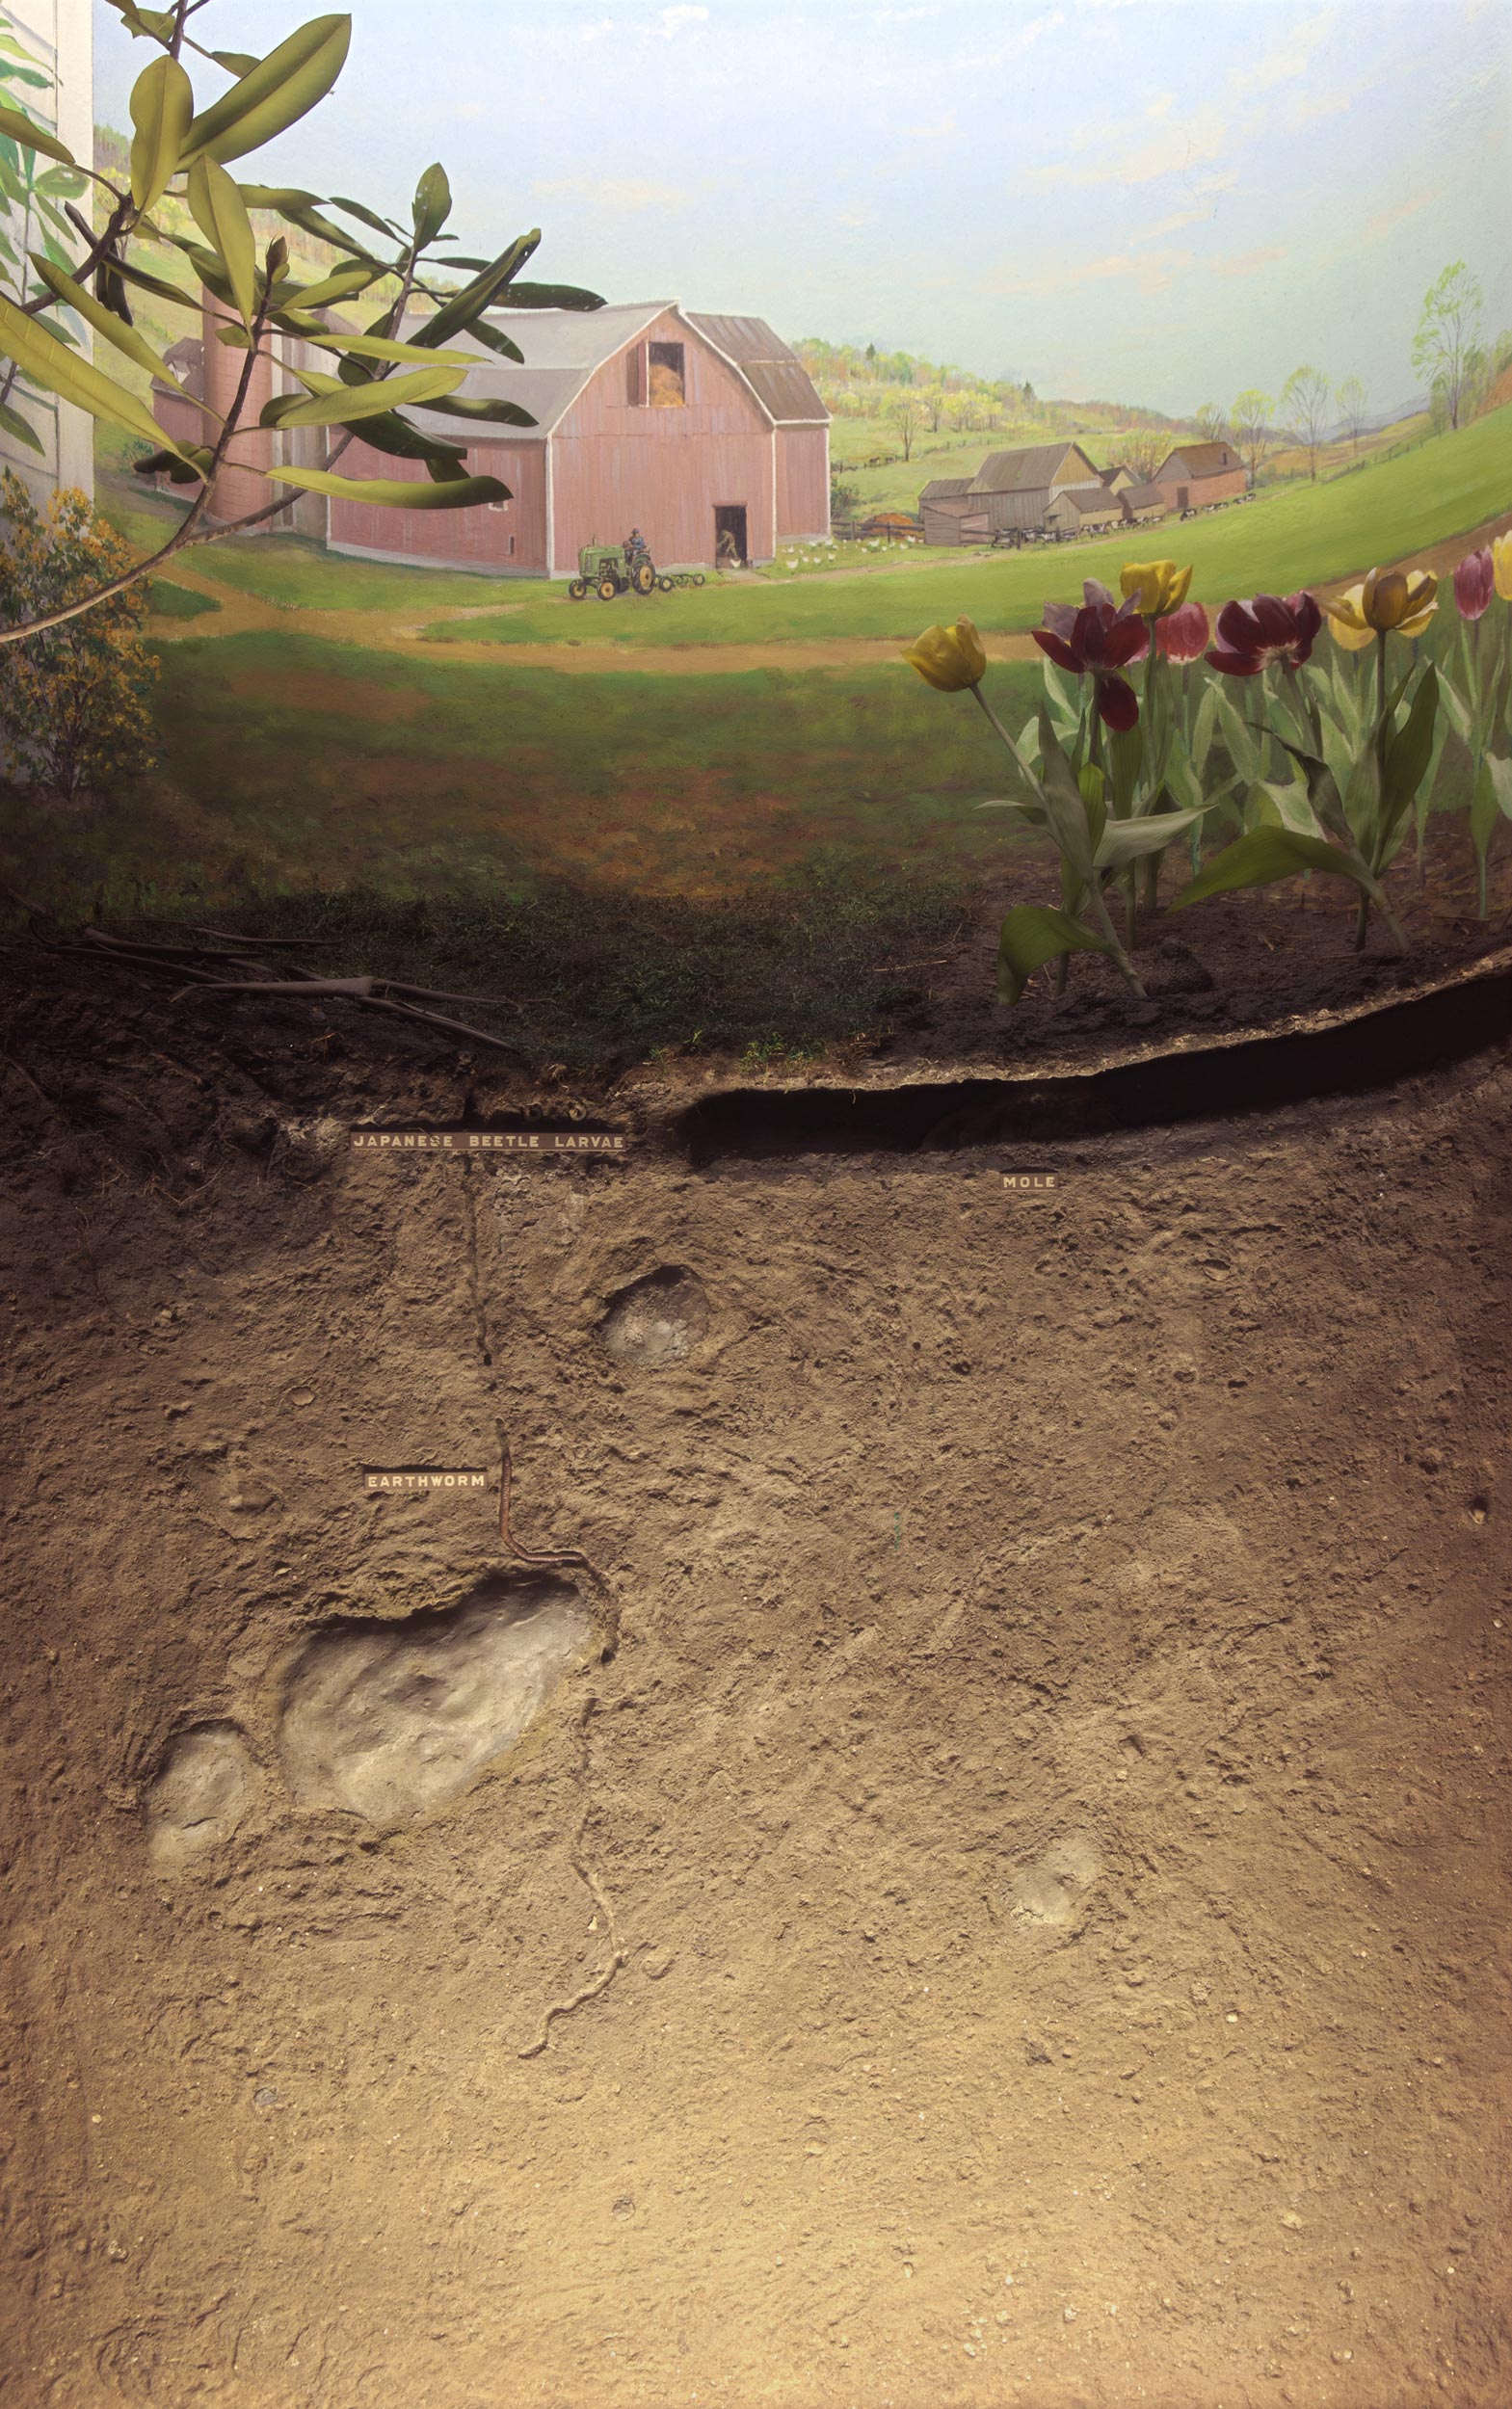 Diorama showing the landscape and cross section of the soil of the farmer's lawn during the spring season.